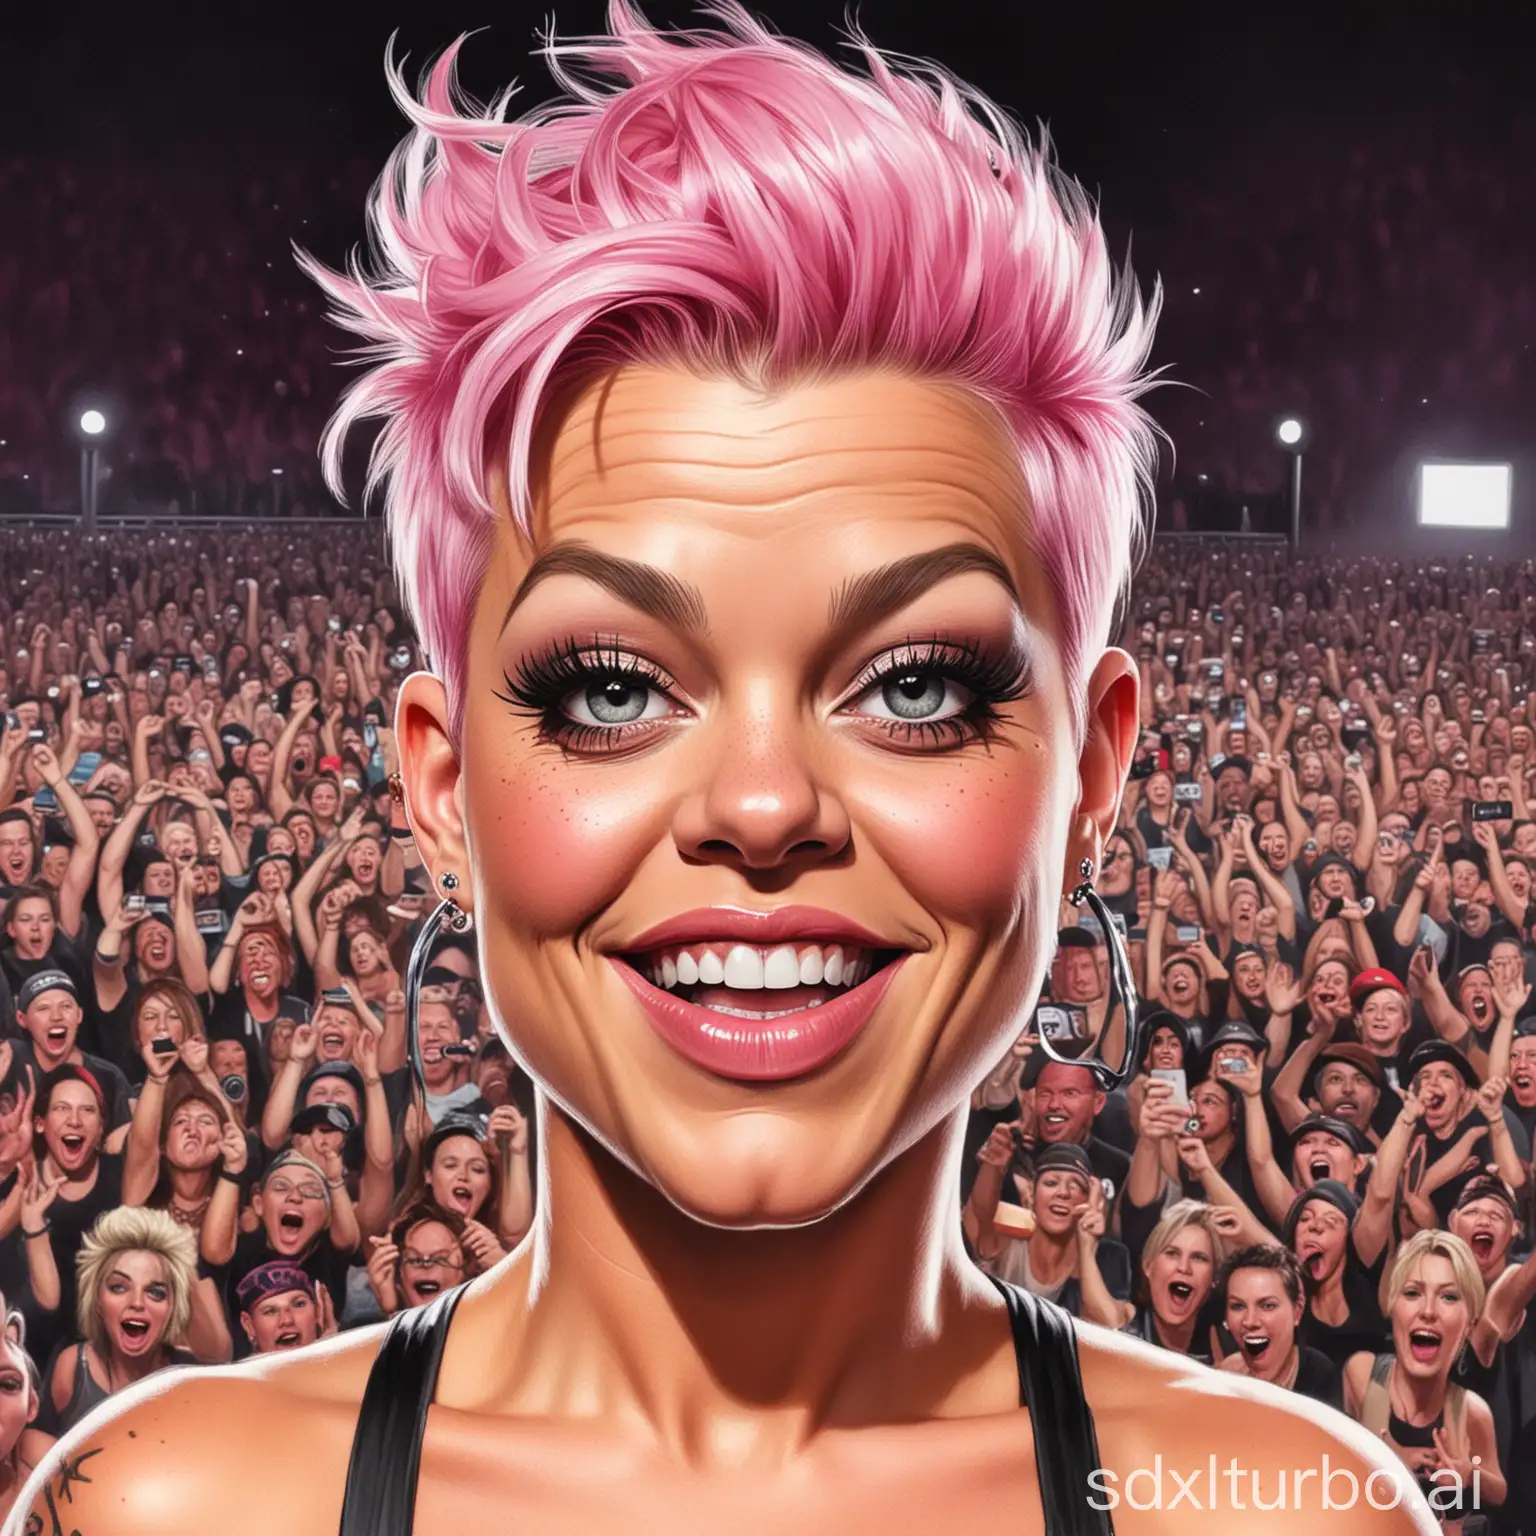 A wonderfully drawn (((caricature))) of the iconic pop star P!nk, exaggerated features and expressions, bringing her signature style and personality to life as she performs on a massive (((stage))) at a joyous, sell-out arena concert, with an enthusiastic crowd gathered below